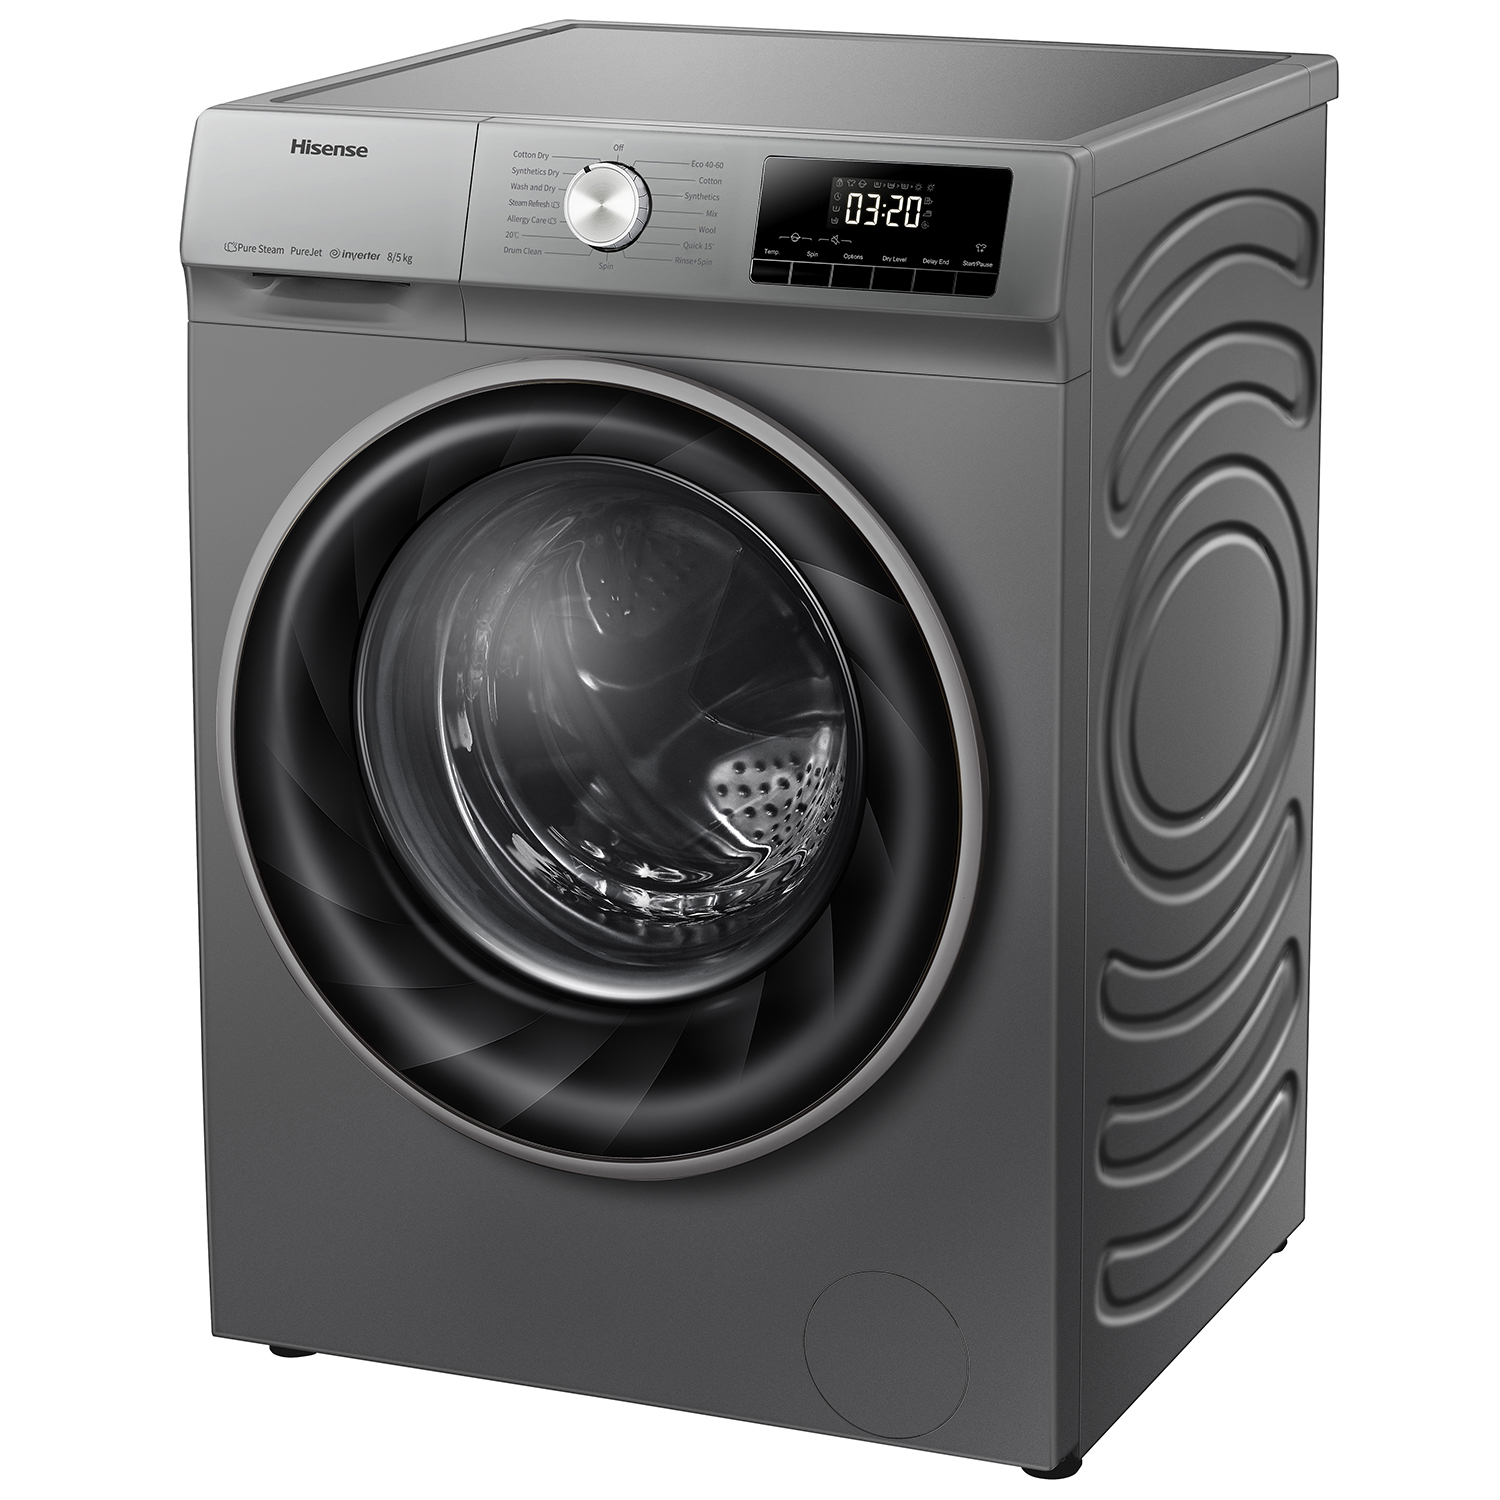 Hisense Dual Inverter Front Load 2 In 1 (8kg Washer and 5kg Dryer) WDQY8014EVJM - Best Washer Dryer Malaysia - Shop Journey